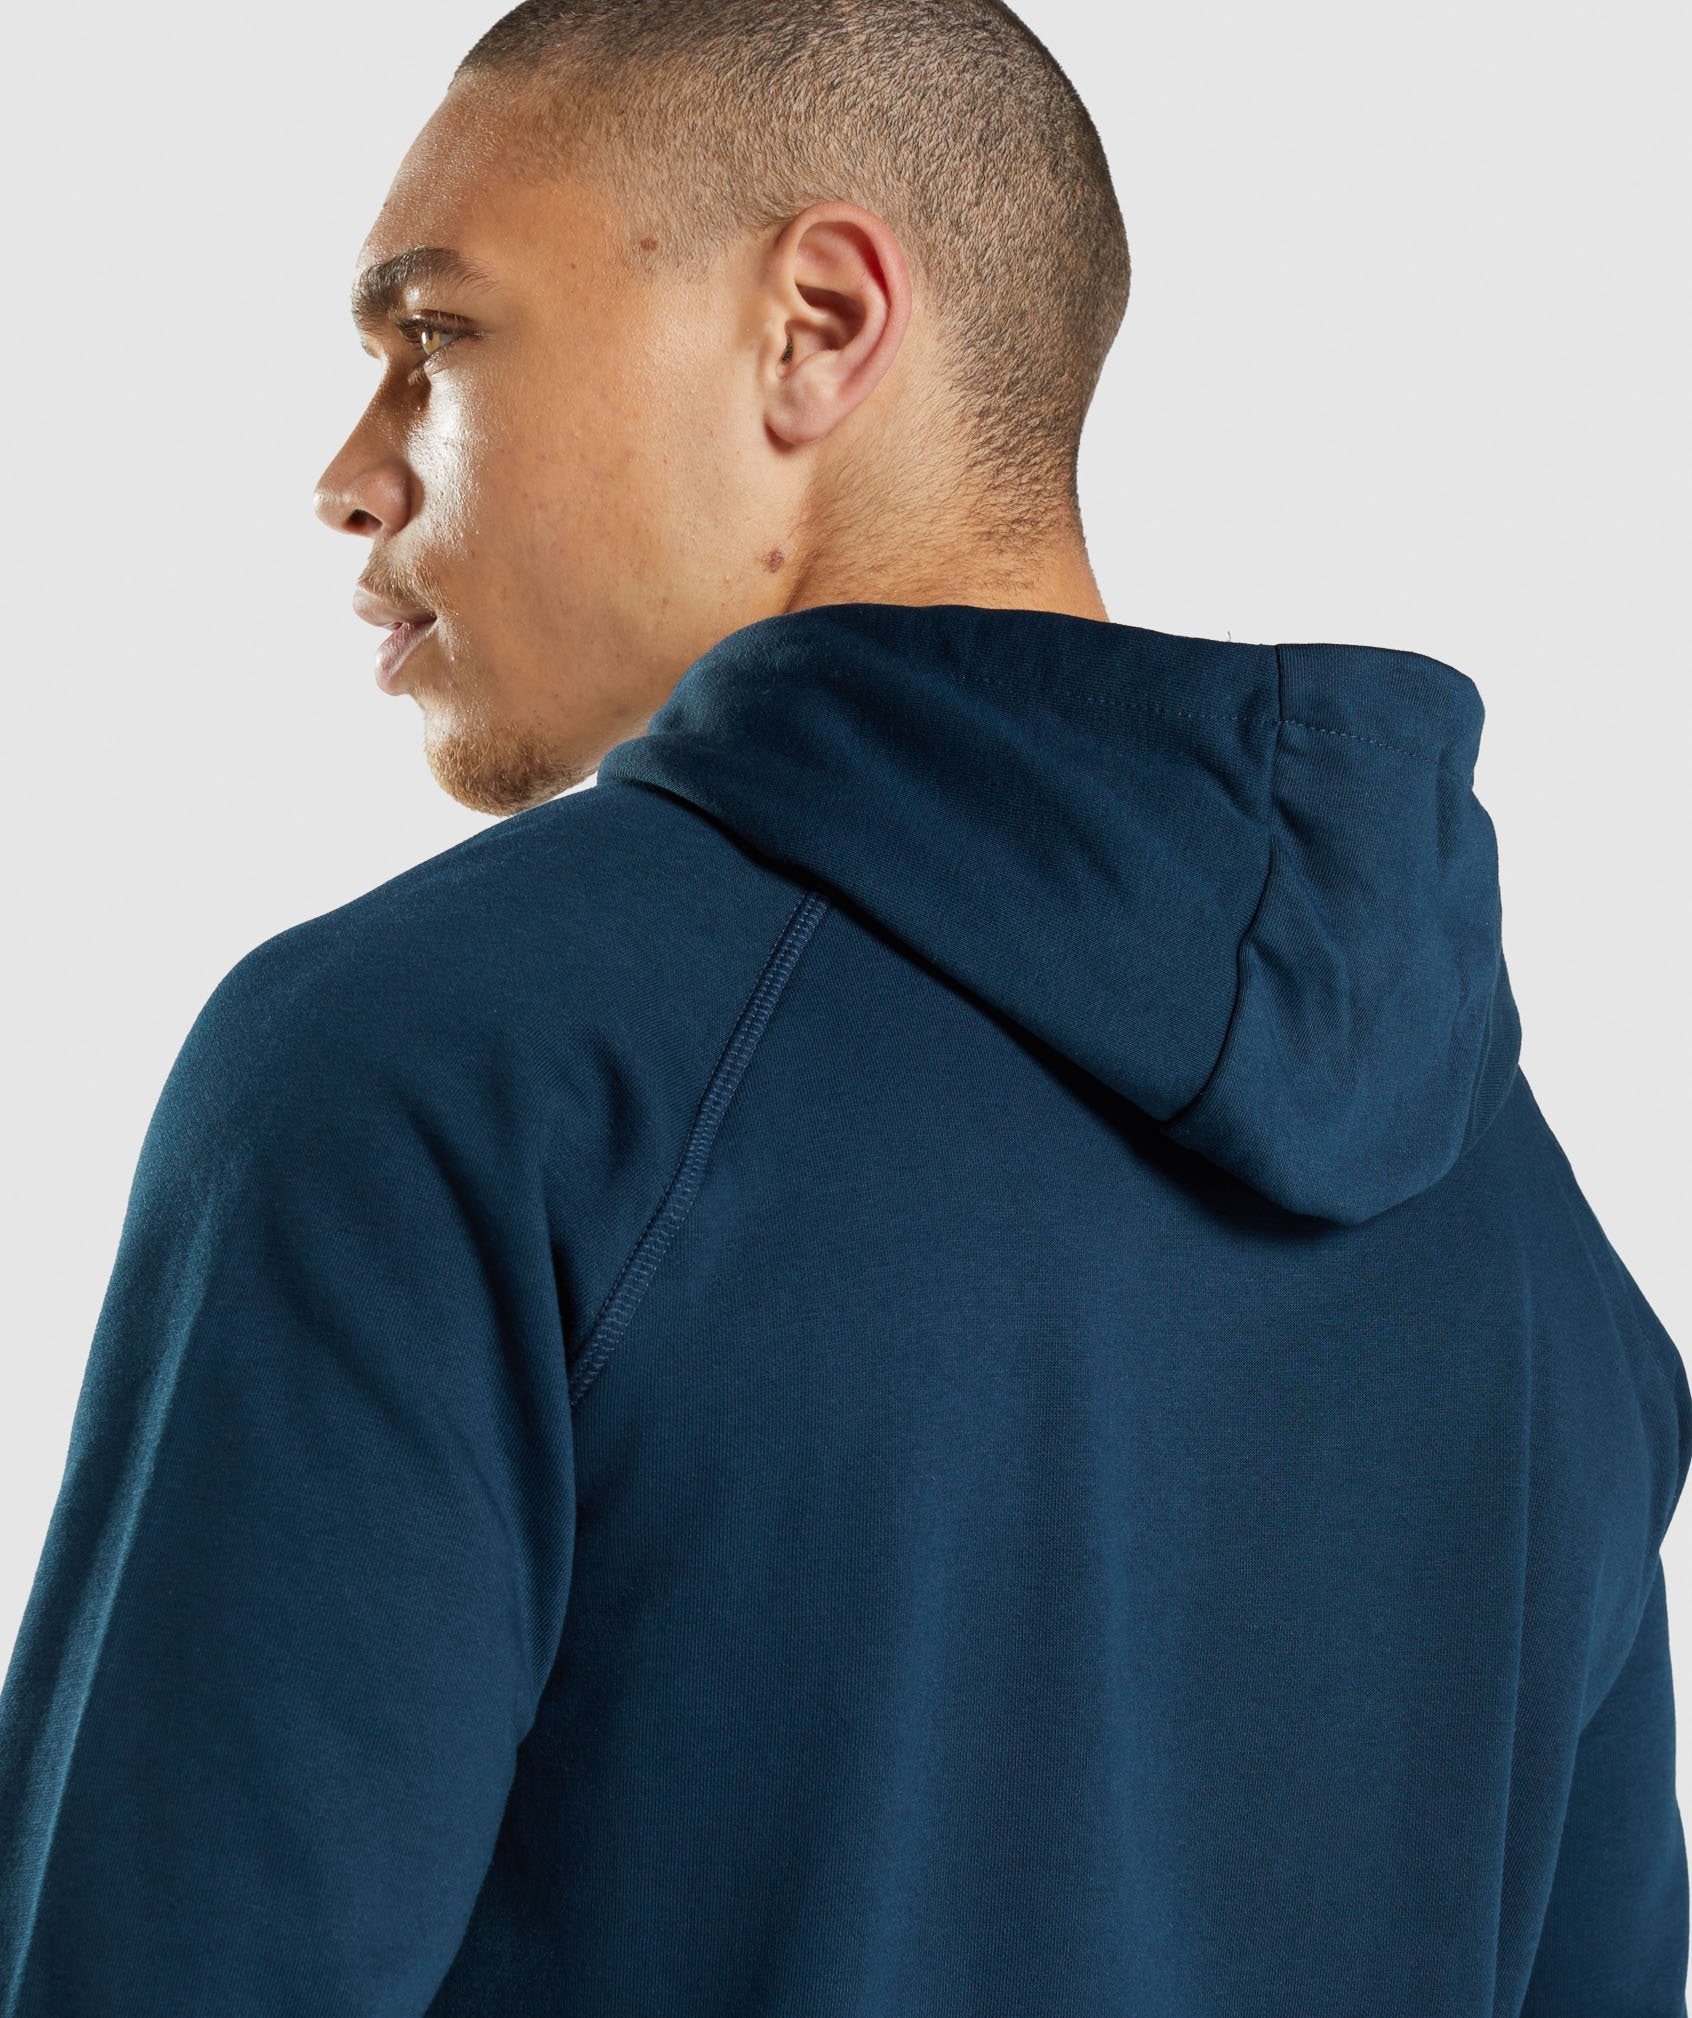 Sharkhead Infill Hoodie in Navy - view 5